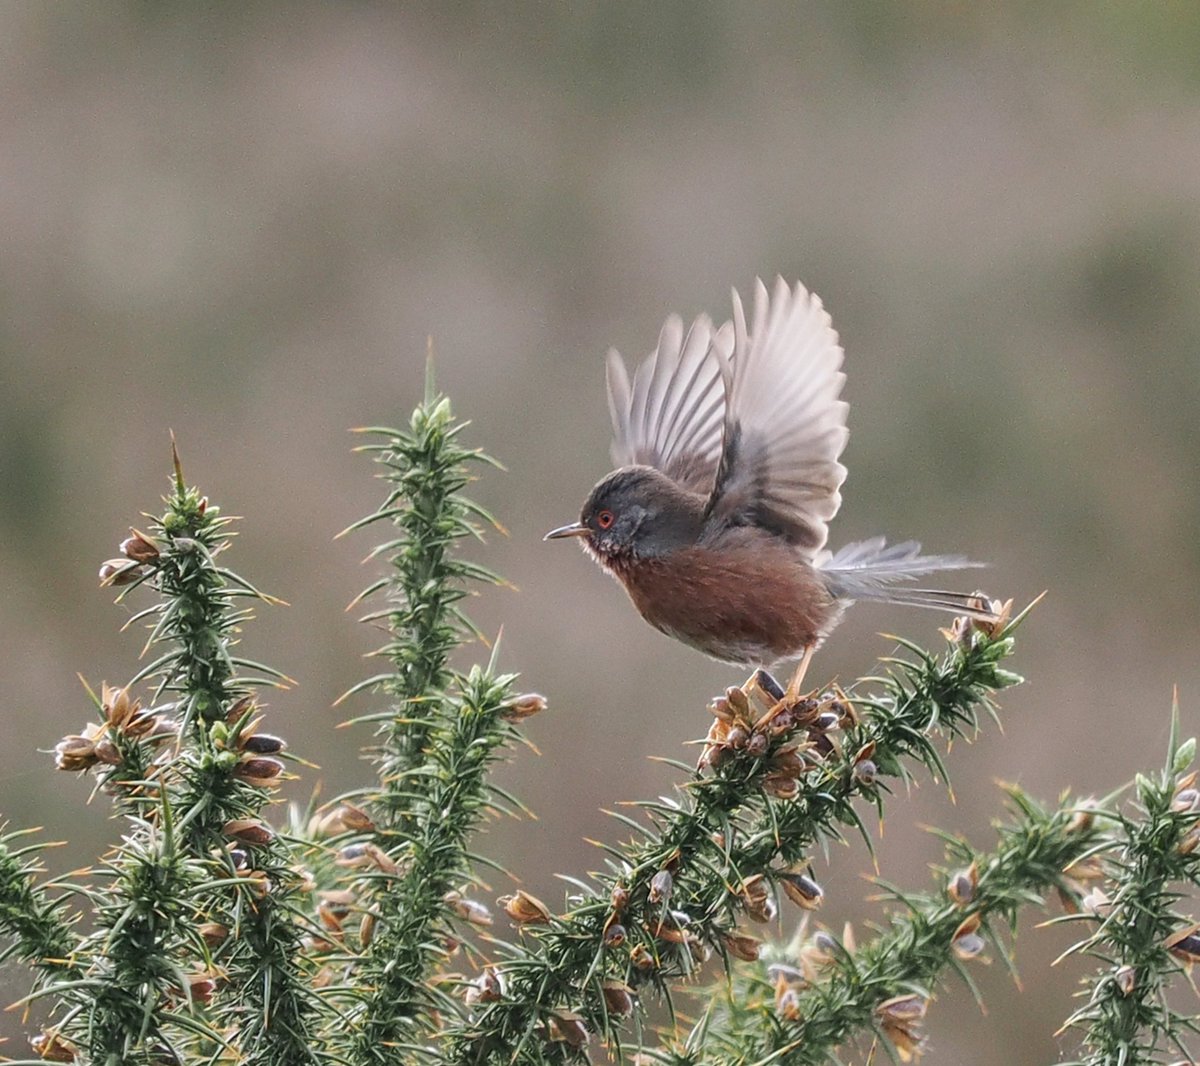 Male Dartford Warbler taking to the wing from his perch on a gorse bush on Westleton Common, Suffolk #birds #birdphotography #wildlife #wildlifephotography #nature #NaturePhotography @Natures_Voice @NaturalEngland @suffolkwildlife @BtoSuffolk @NatureUK @Britnatureguide